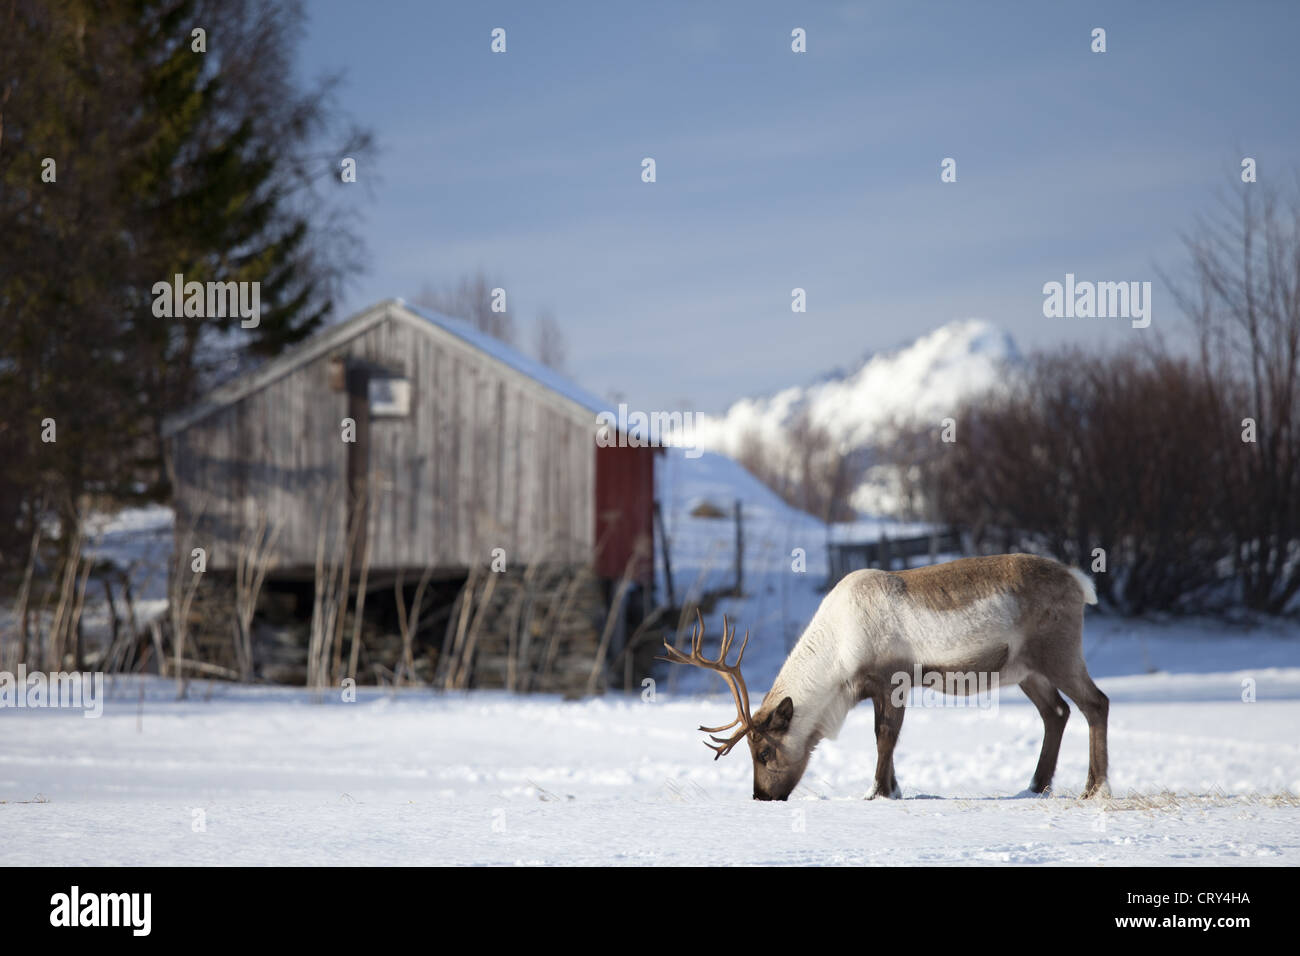 Reindeer grazing in the snow in arctic landscape at Kvaløysletta, Kvaloya Island, Tromso in Arctic Circle Northern Norway Stock Photo